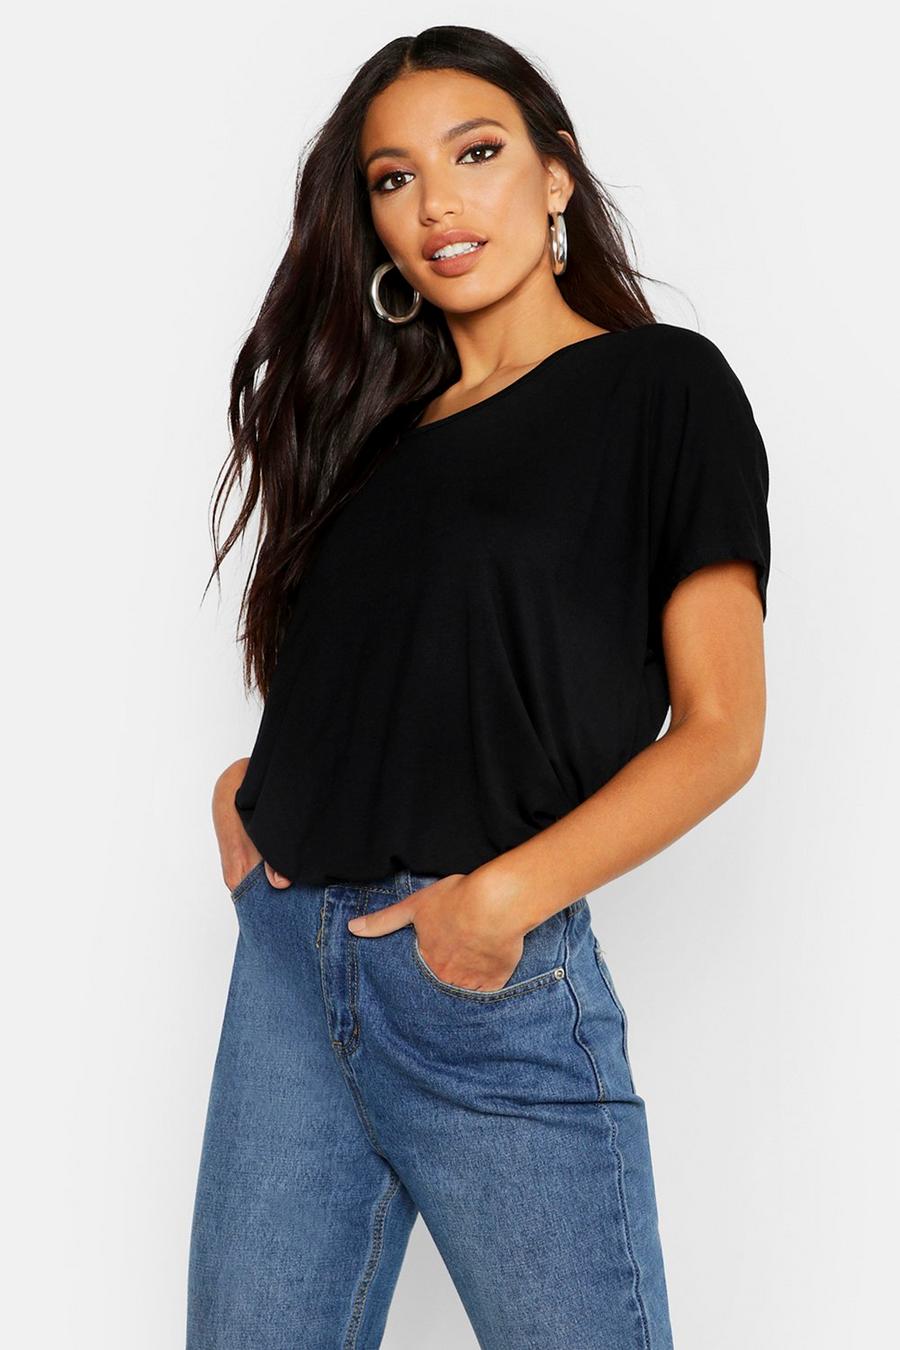 Oversized Black T Shirt Outfit Ideas You Need to See Now!